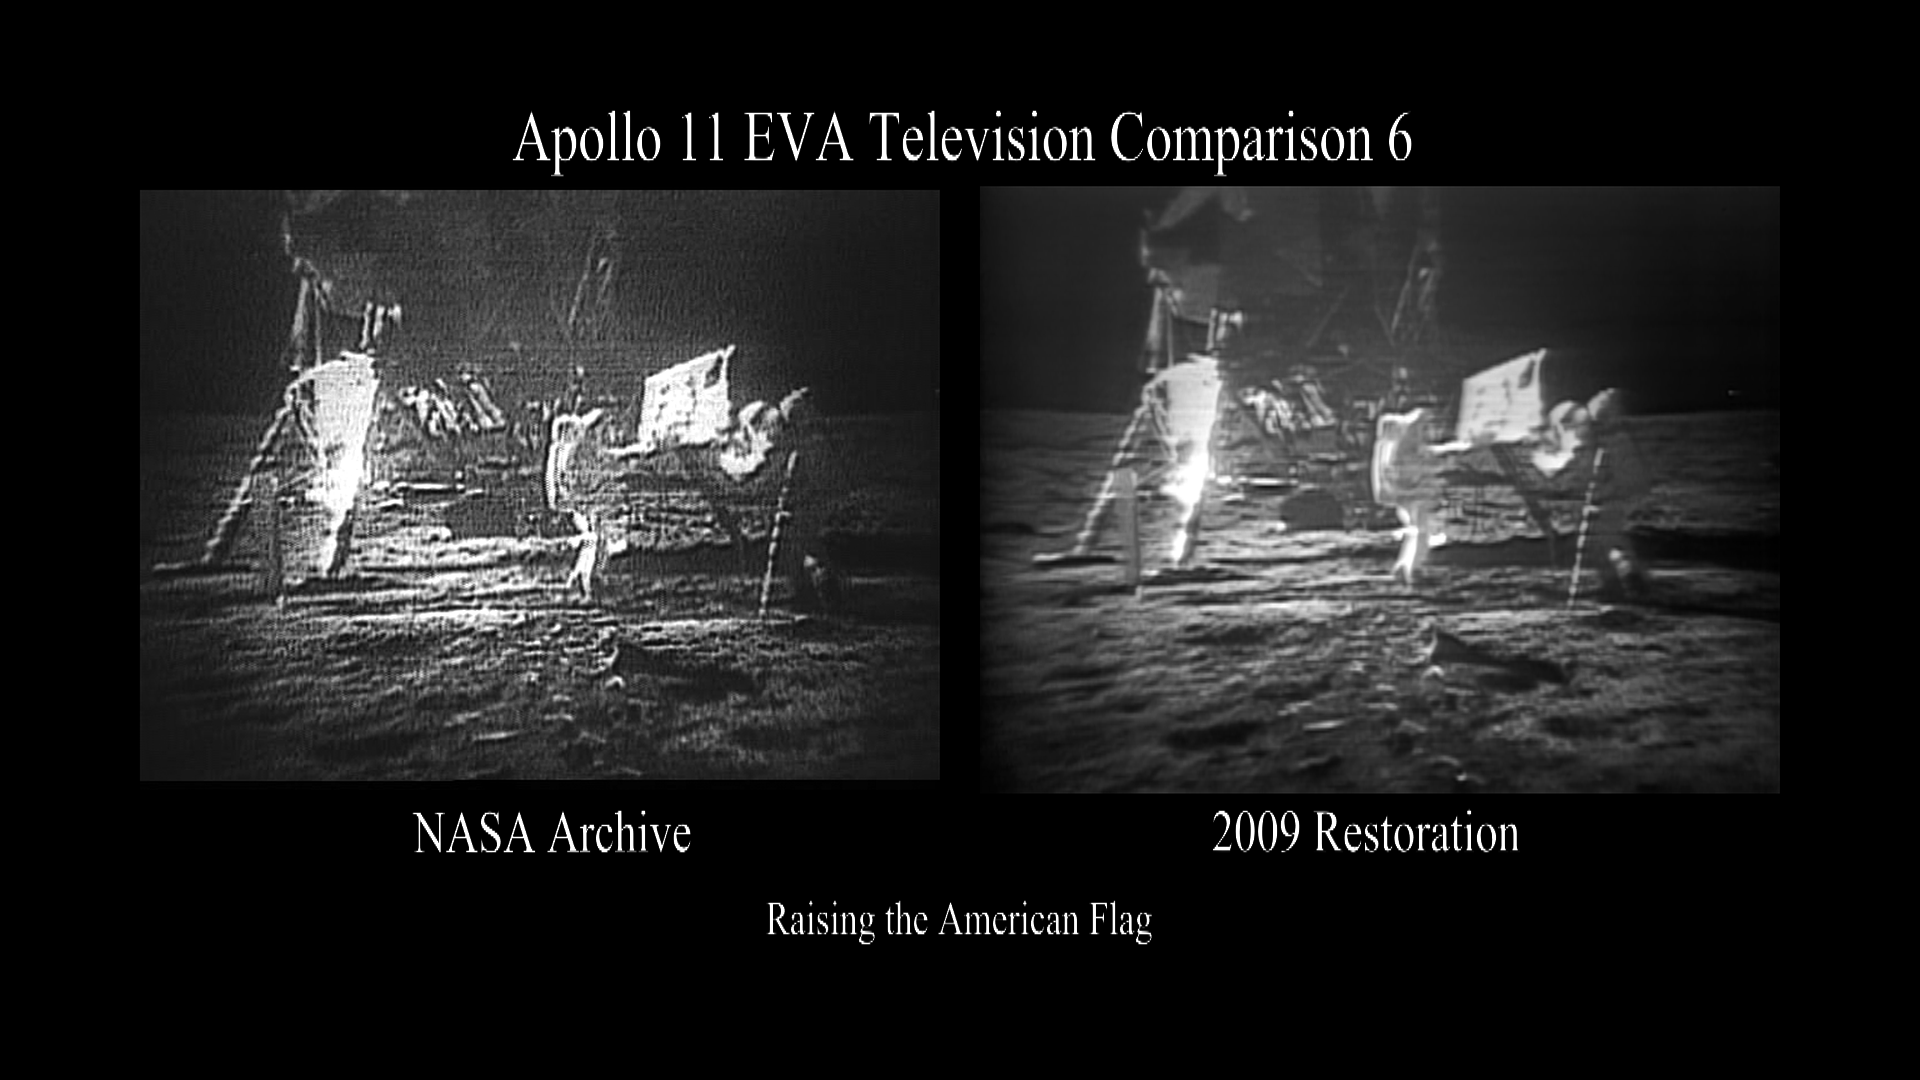 A side by side comparison of the original broadcast video and partially restored video of Raising the American Flag.